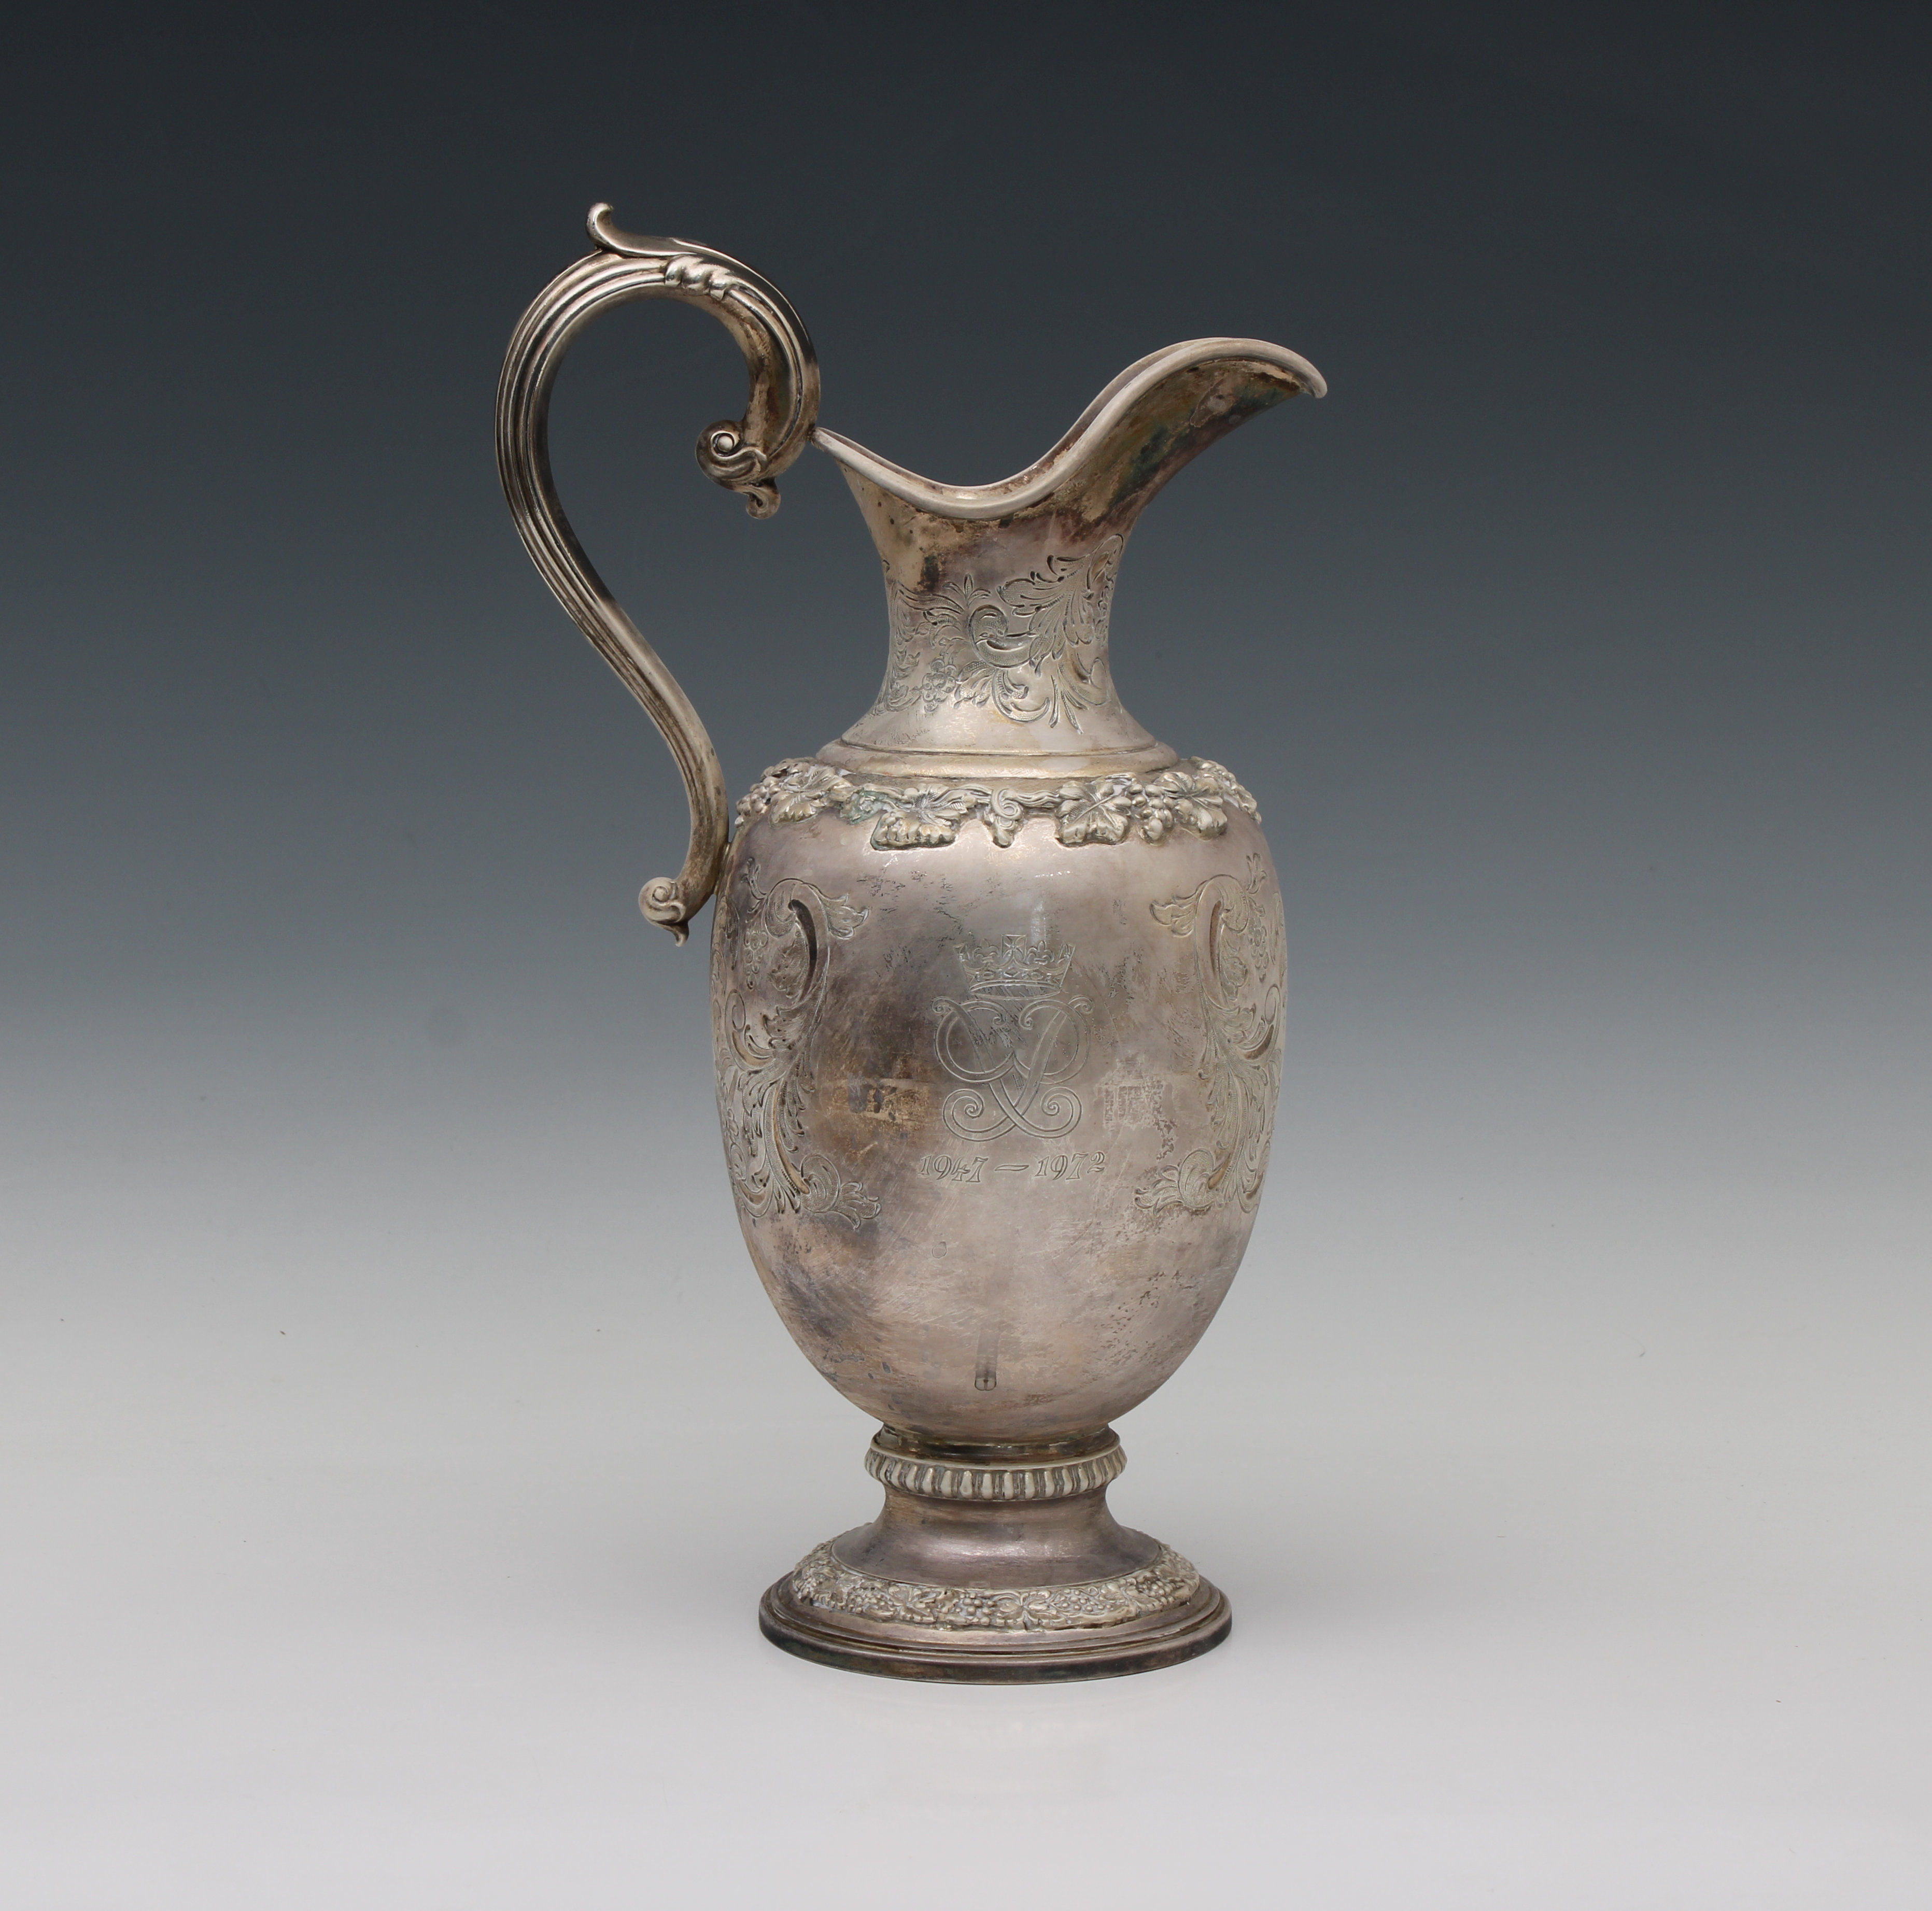 A Garrard silver limited edition wine jug / ewer commemorating the silver wedding of HM Queen Elizab - Image 3 of 6